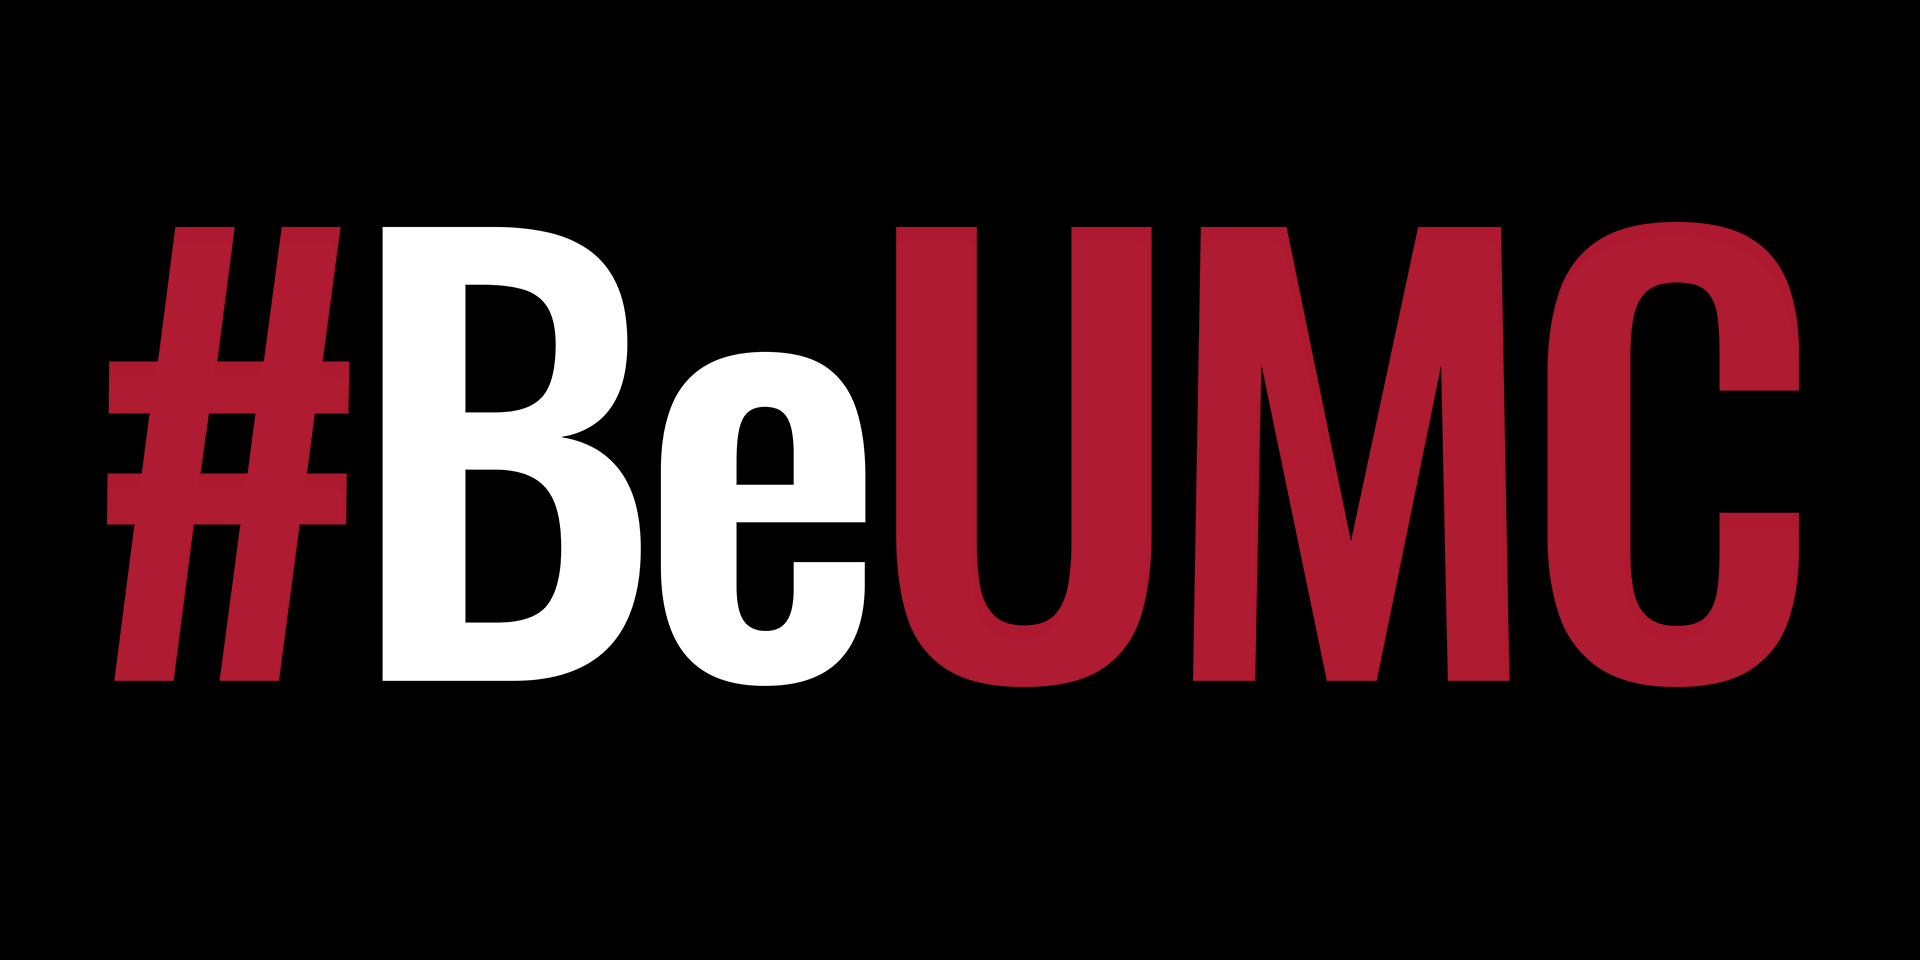 The #BeUMC campaign reminds us of who we are at our best. As people of God called The United Methodist Church, we’re faithful followers of Jesus seeking to make the world a better place.